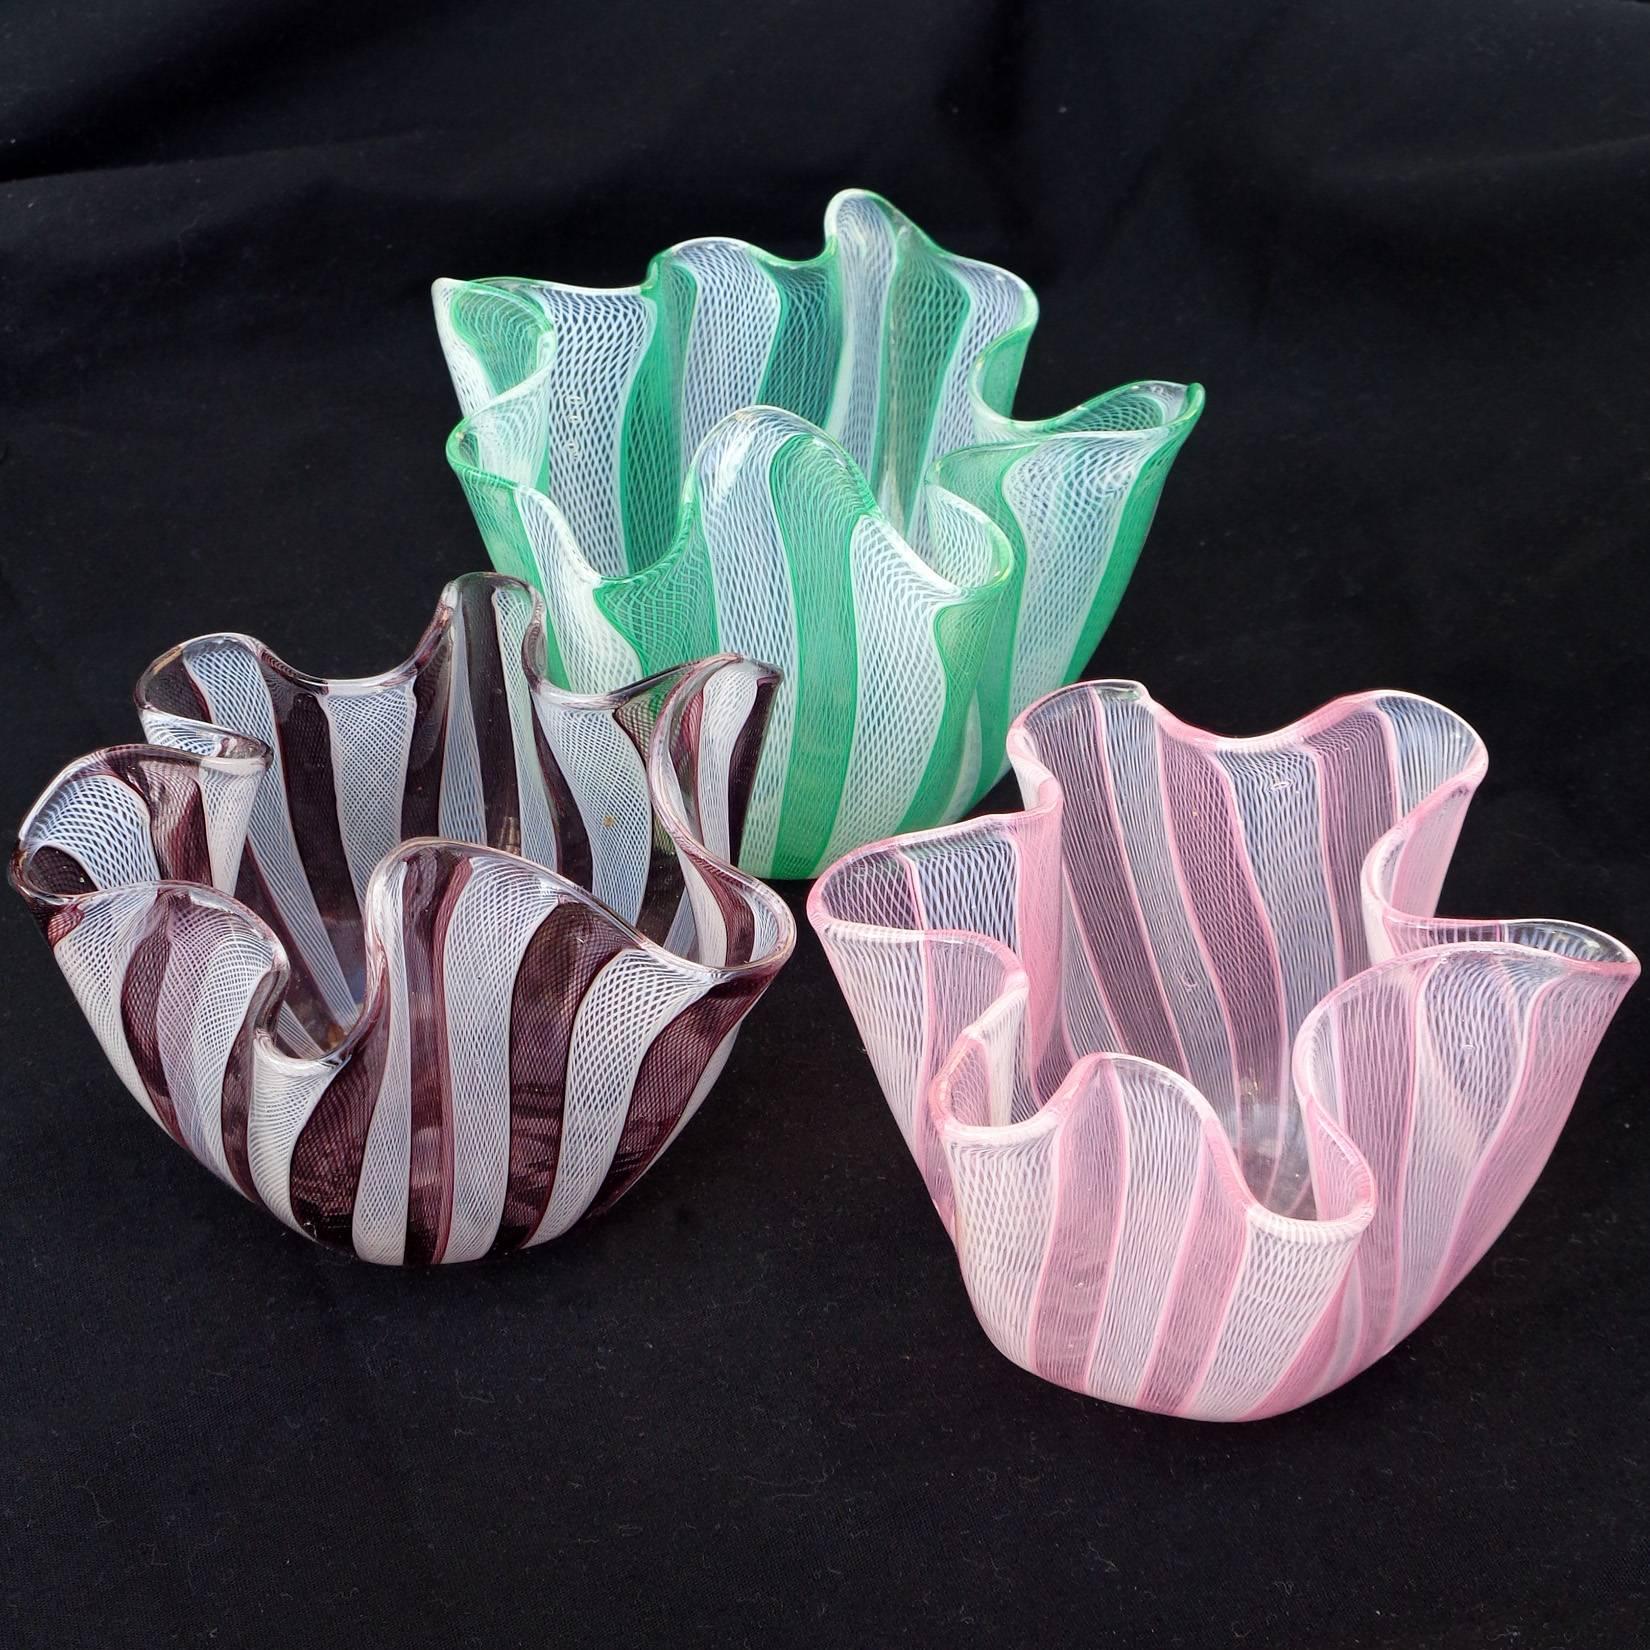 Free shipping worldwide! See details below description.

Beautiful set of Murano hand blown tight Zanfirico net ribbons art glass fazzoletto vases. Documented to Paolo Venini and Fulvio Bianconi. Pink and purple are signed 